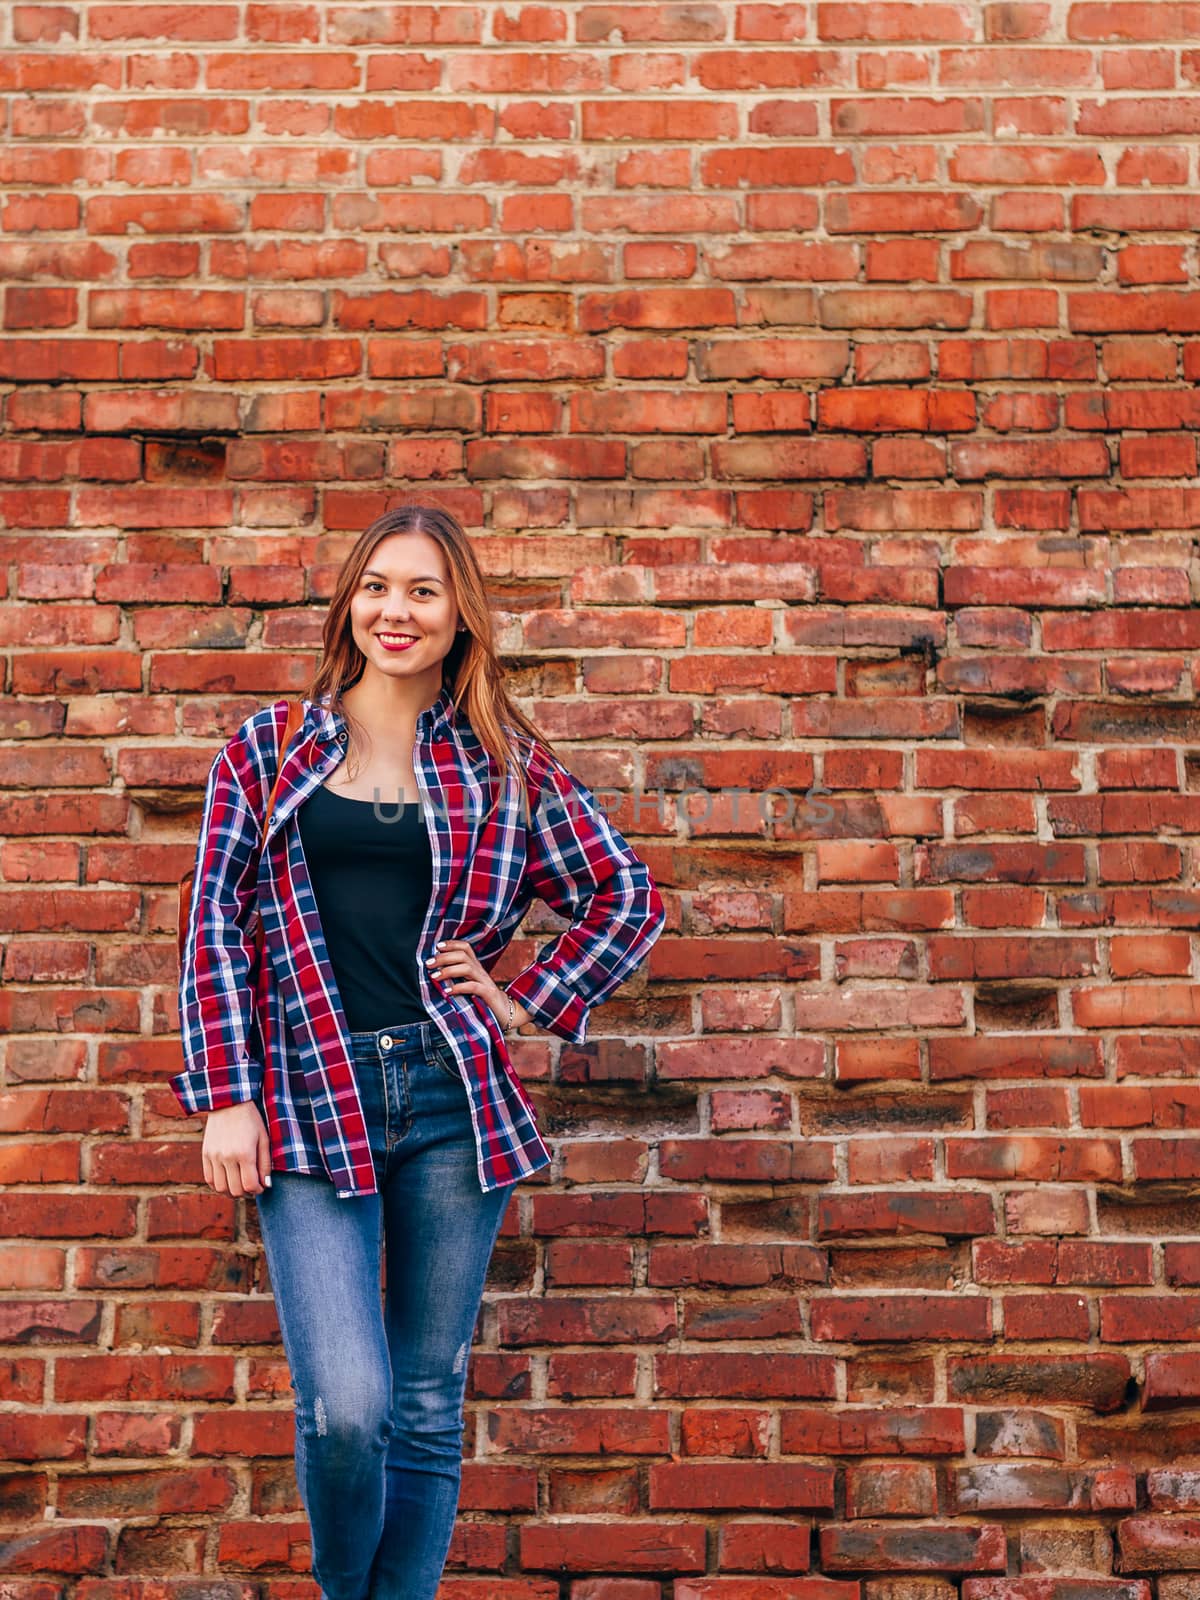 Portrait of young woman standing against brick wall by Seva_blsv